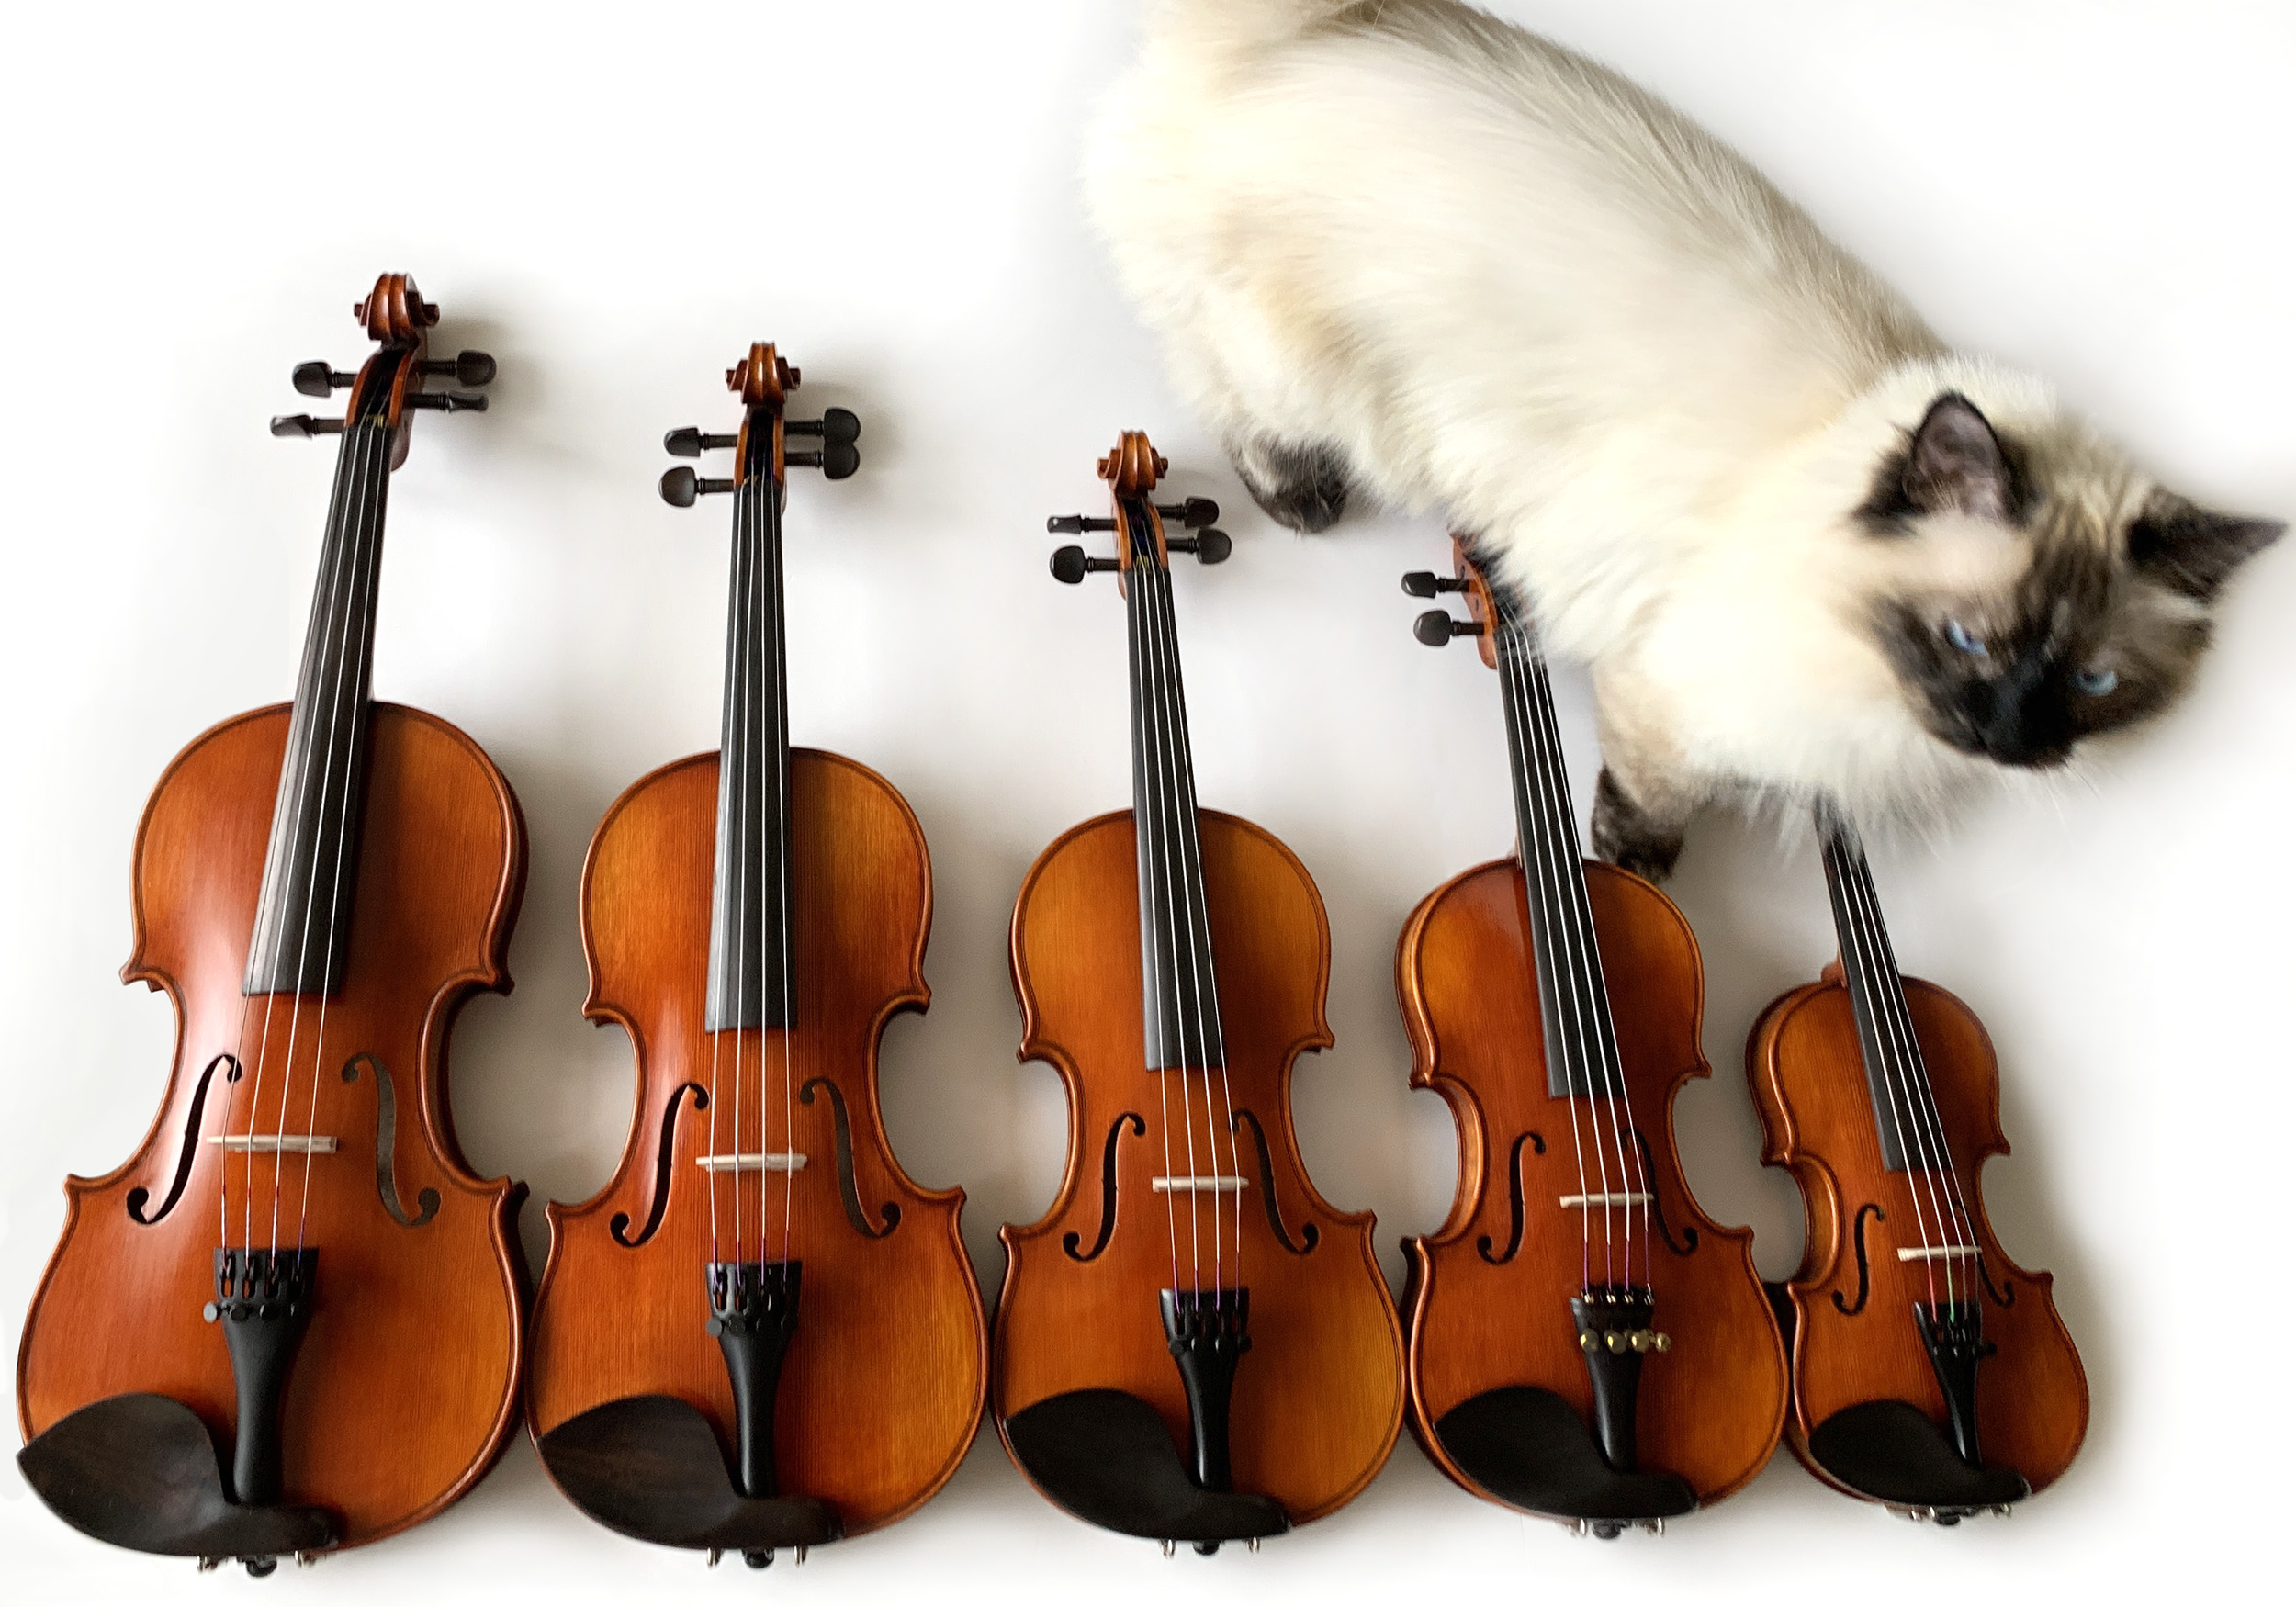 Violins largest to smallest with a ragdoll siamese cat photobombing